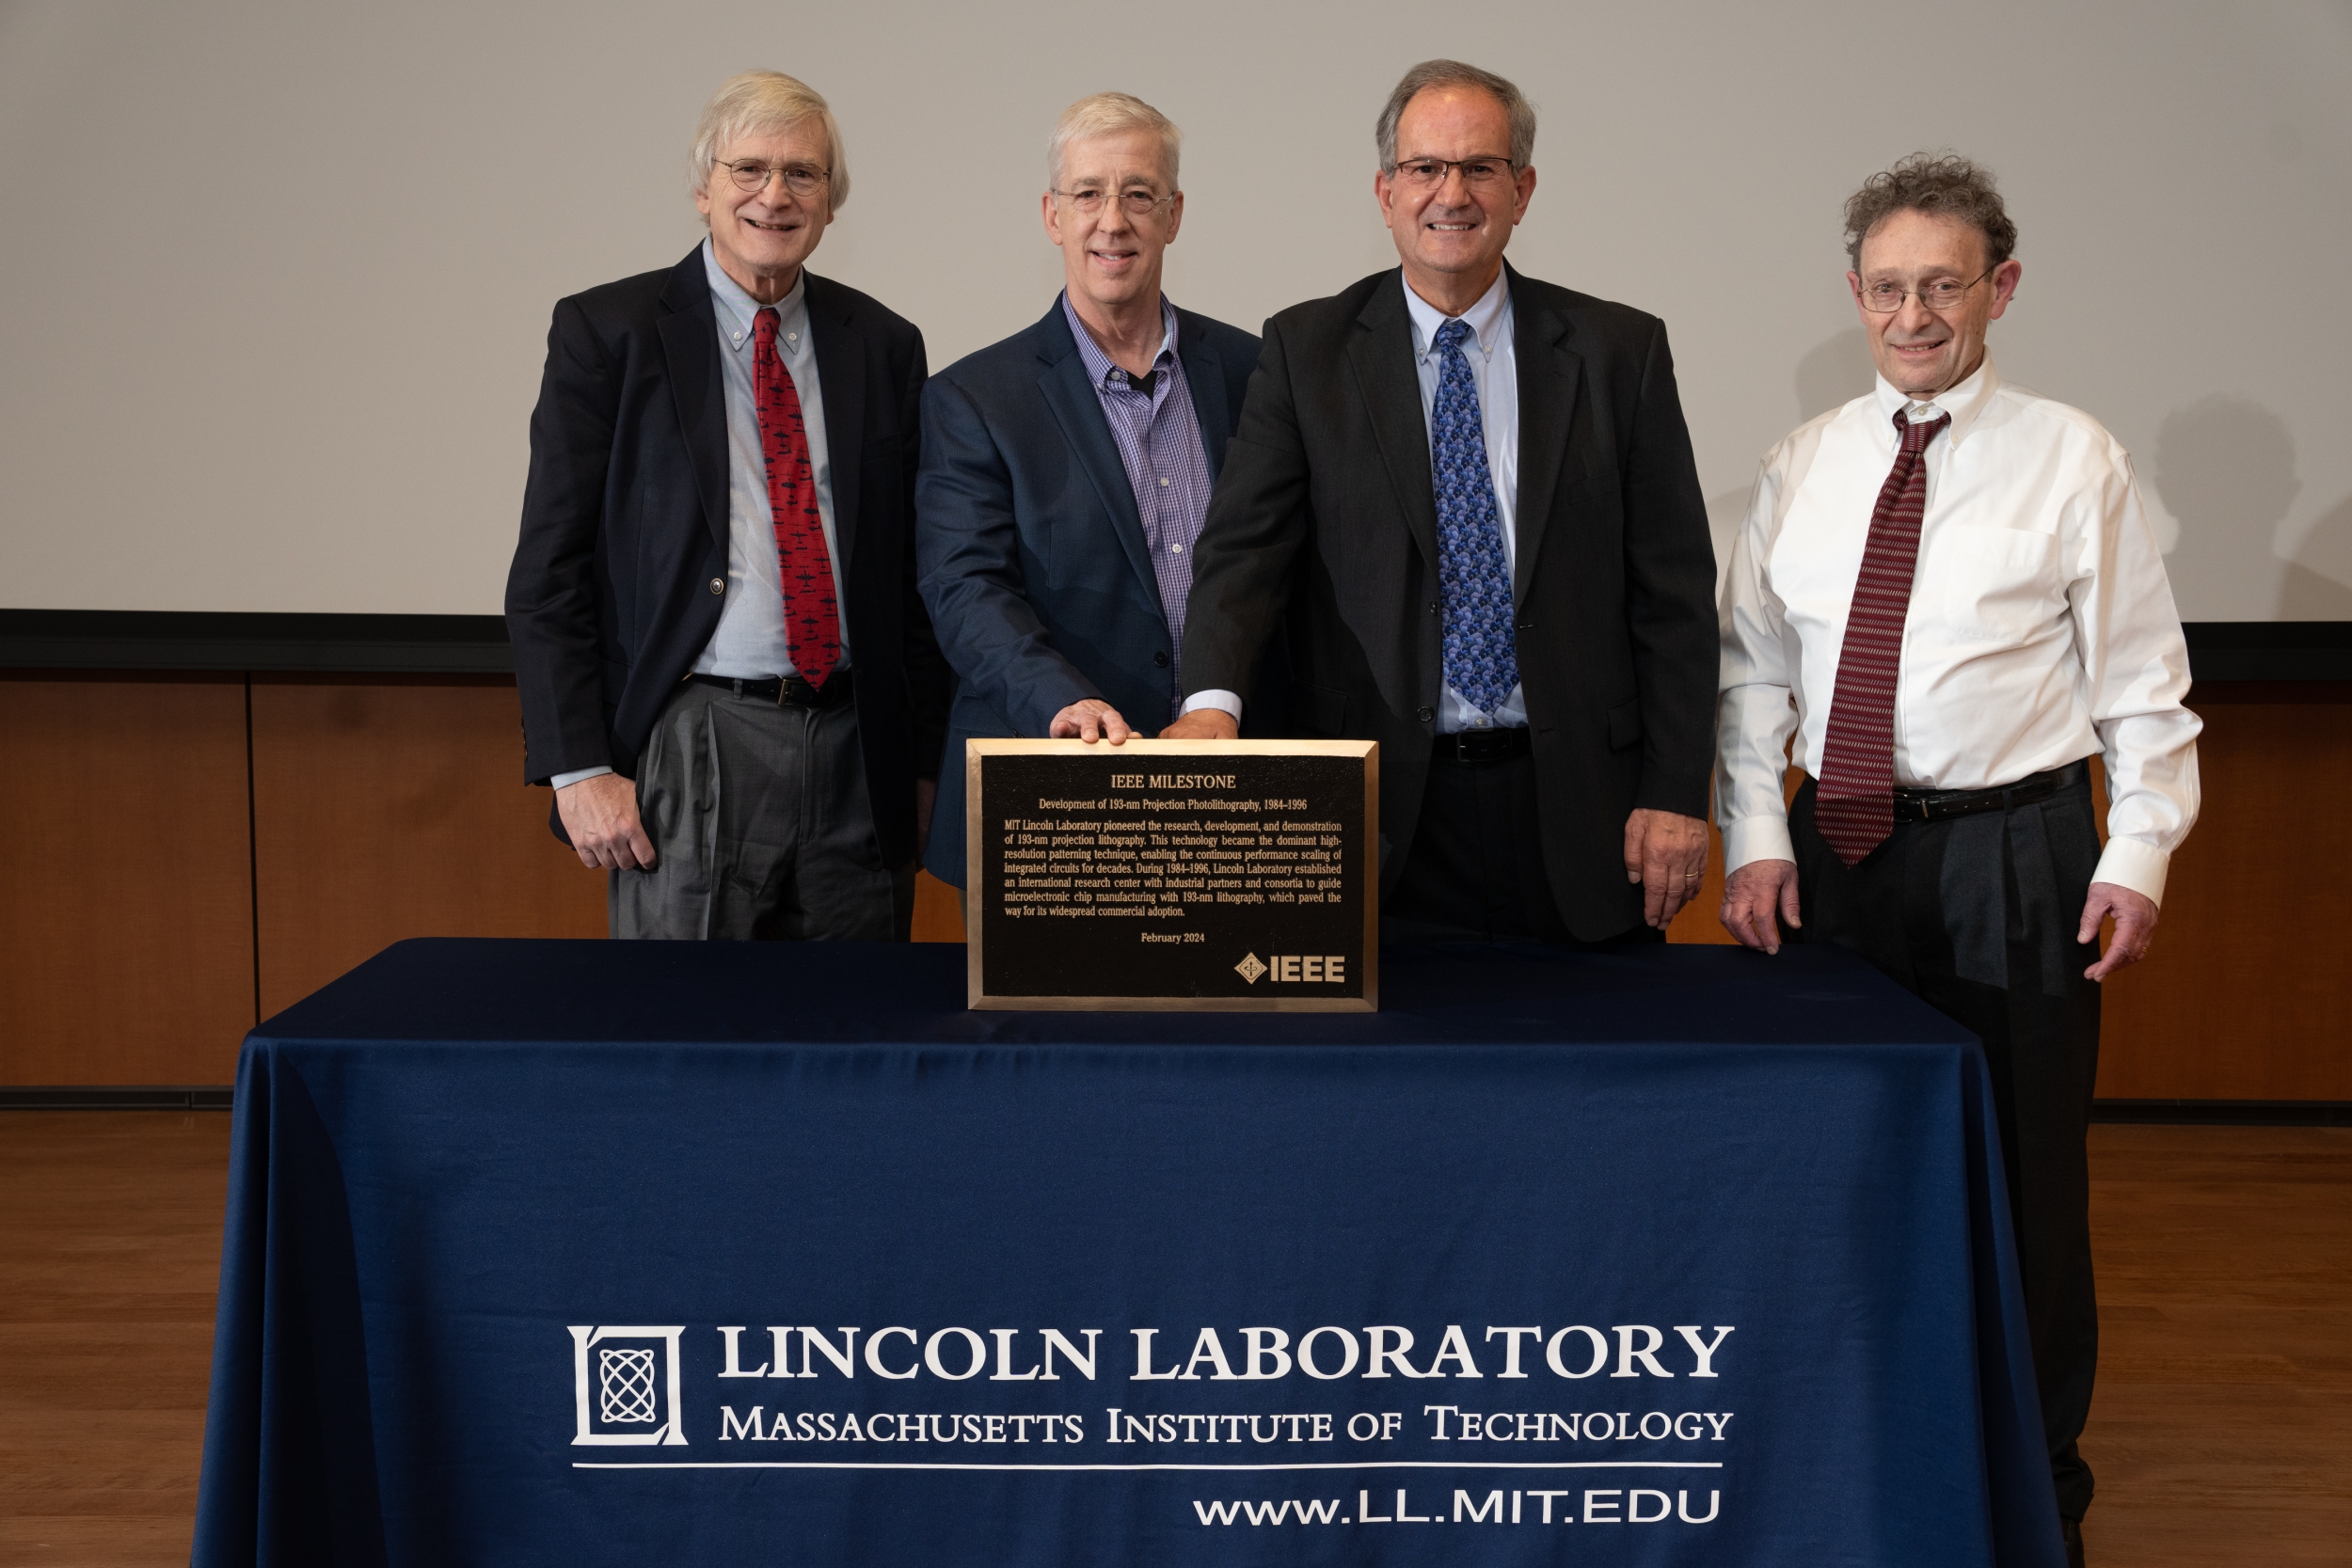 Alan Shaver, Dan Corliss, Craig Keast, and Mordechai Rothschild are pictured with the 193 nm photolithography plaque.